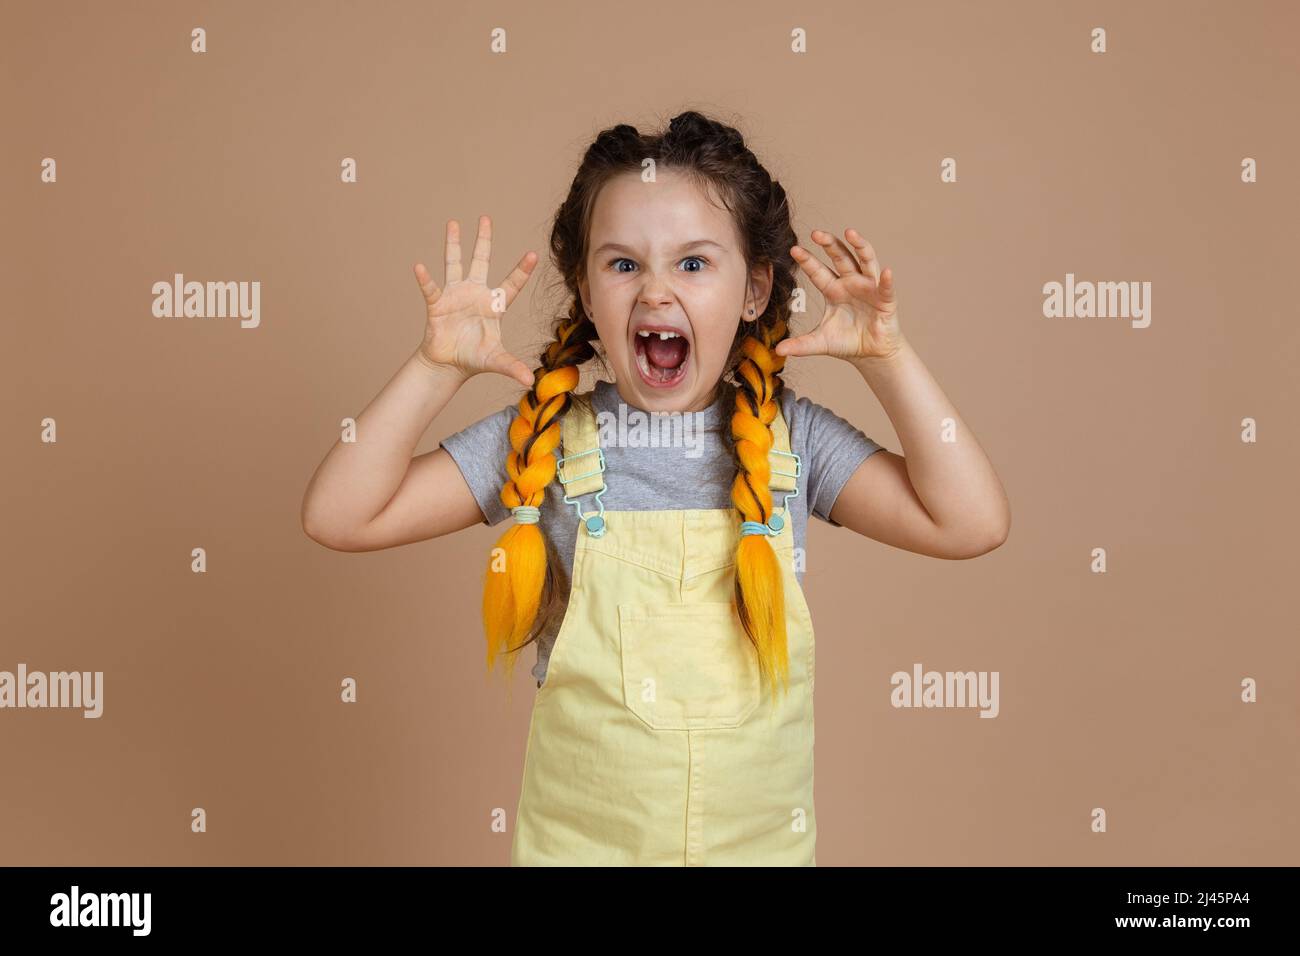 Portrait of playful little girl with yellow kanekalon pigtails, pretending to be scary frightening with hands and opened mouth wearing yellow jumpsuit Stock Photo